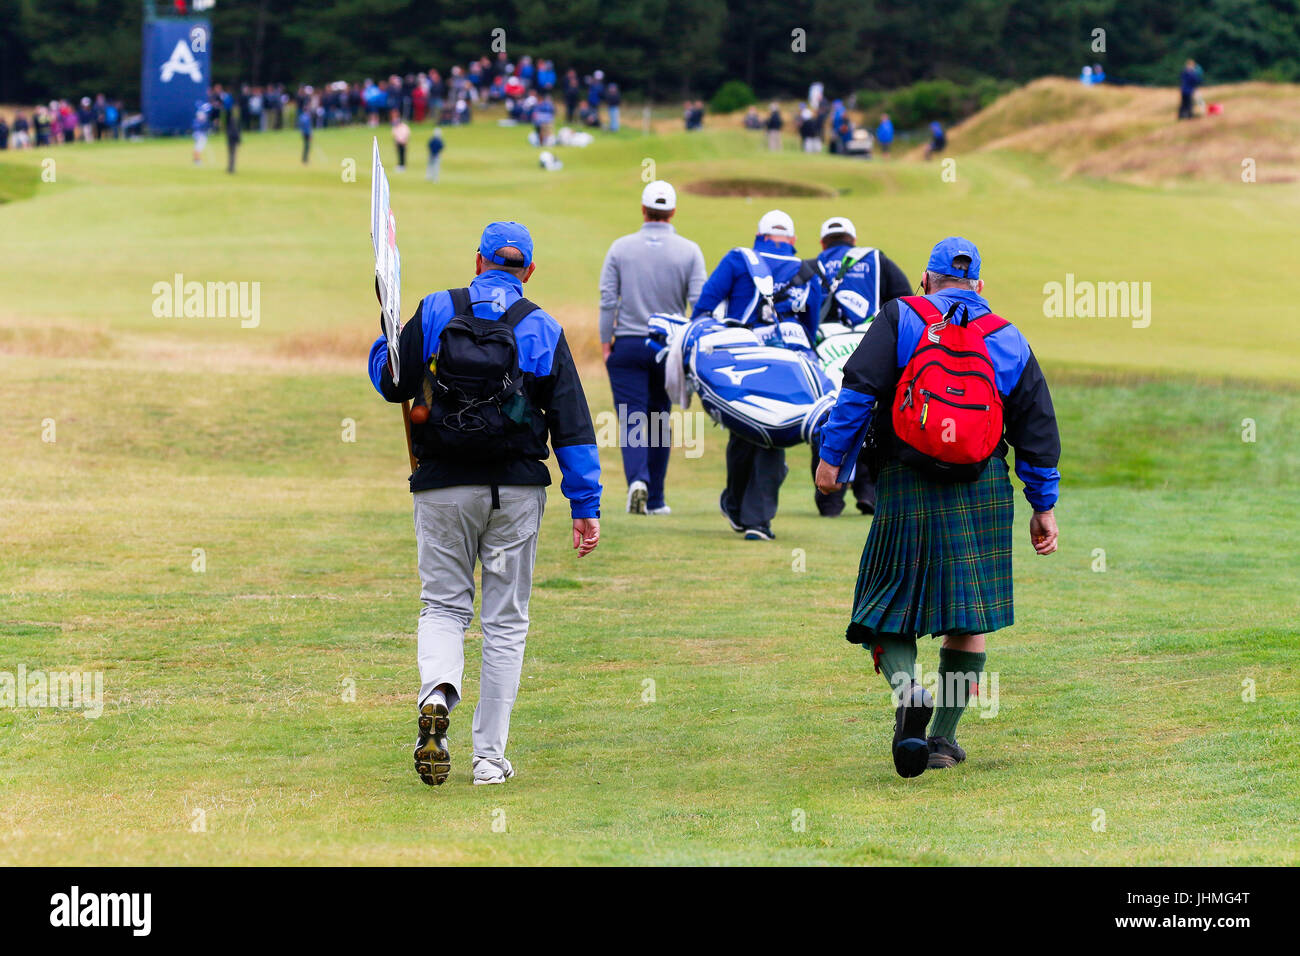 Irvine, Scotland, UK. 14th July, 2017. The organisers of The Scottish Open Golf championship declared the second day to be 'Tartan Day' and asked members of the public, officials and players to wear something tartan if possible. Some agreed to the request. Credit: Findlay/Alamy Live News Stock Photo